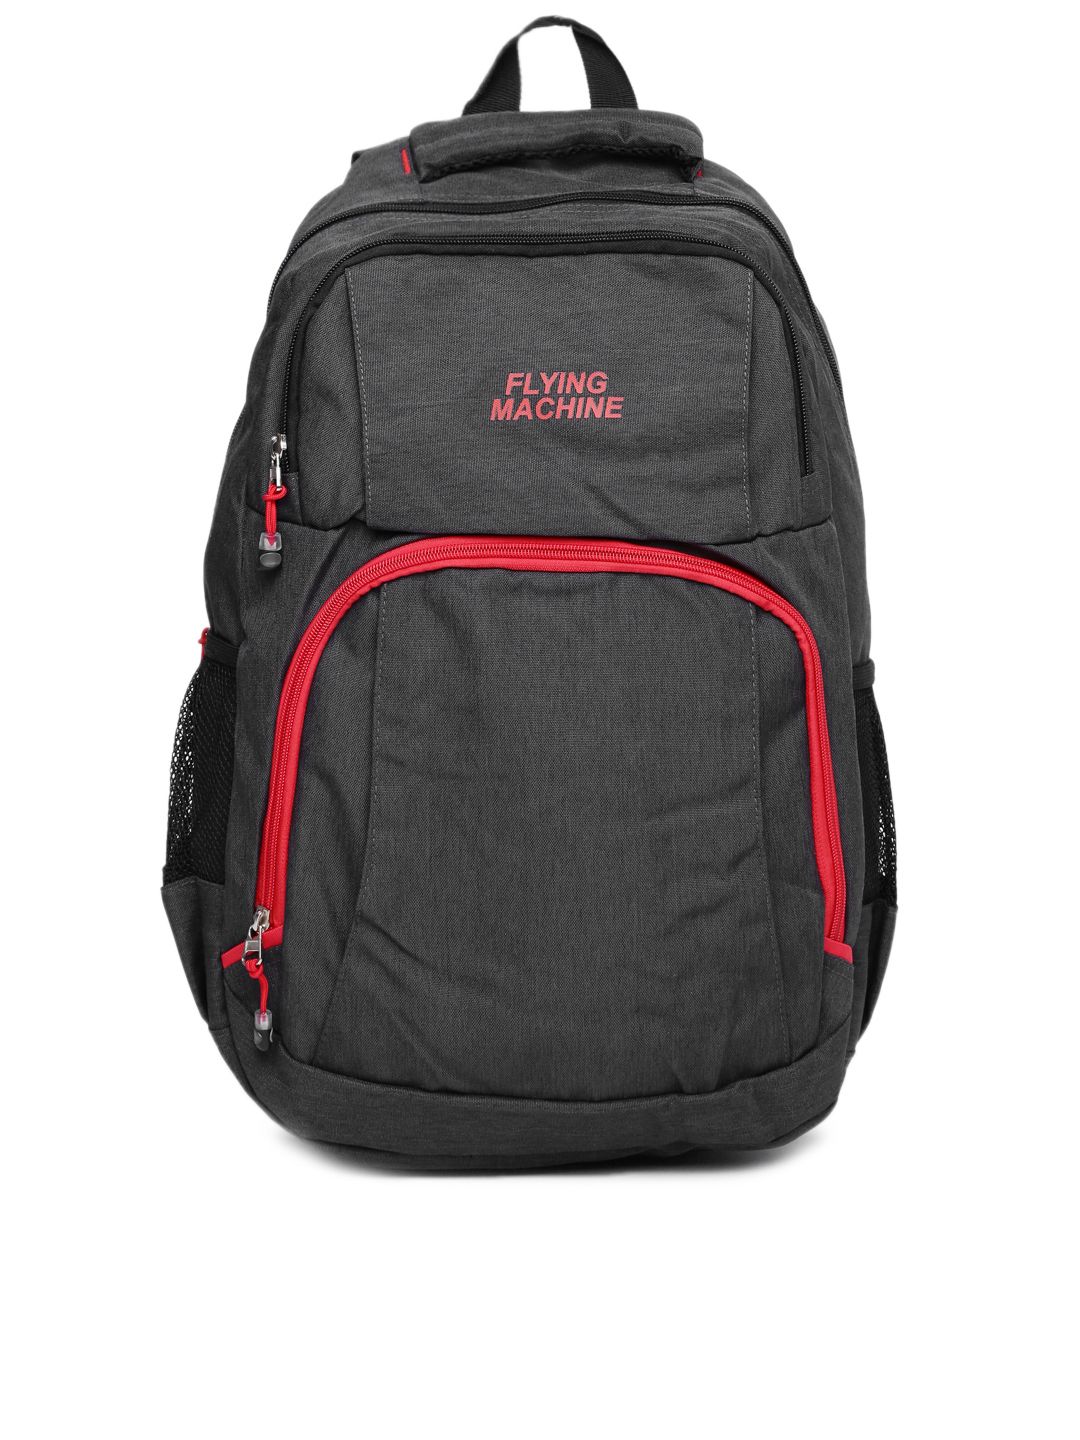 Flying Machine Unisex Charcoal Grey Laptop Backpack Price in India